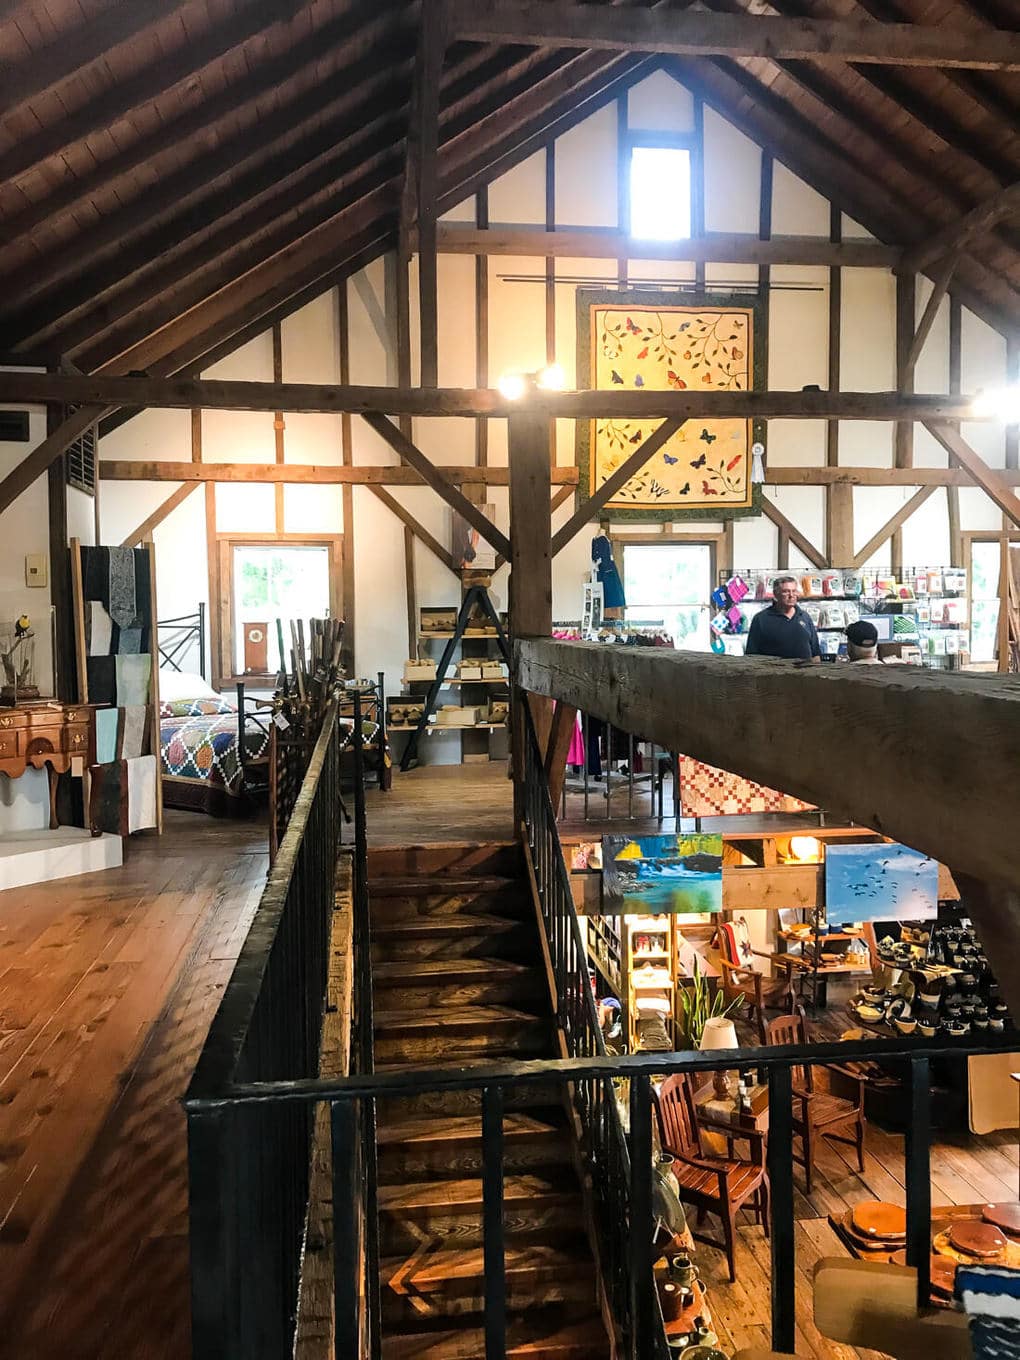 Where to shop in Waco Texas - the Heritage Homestead shops